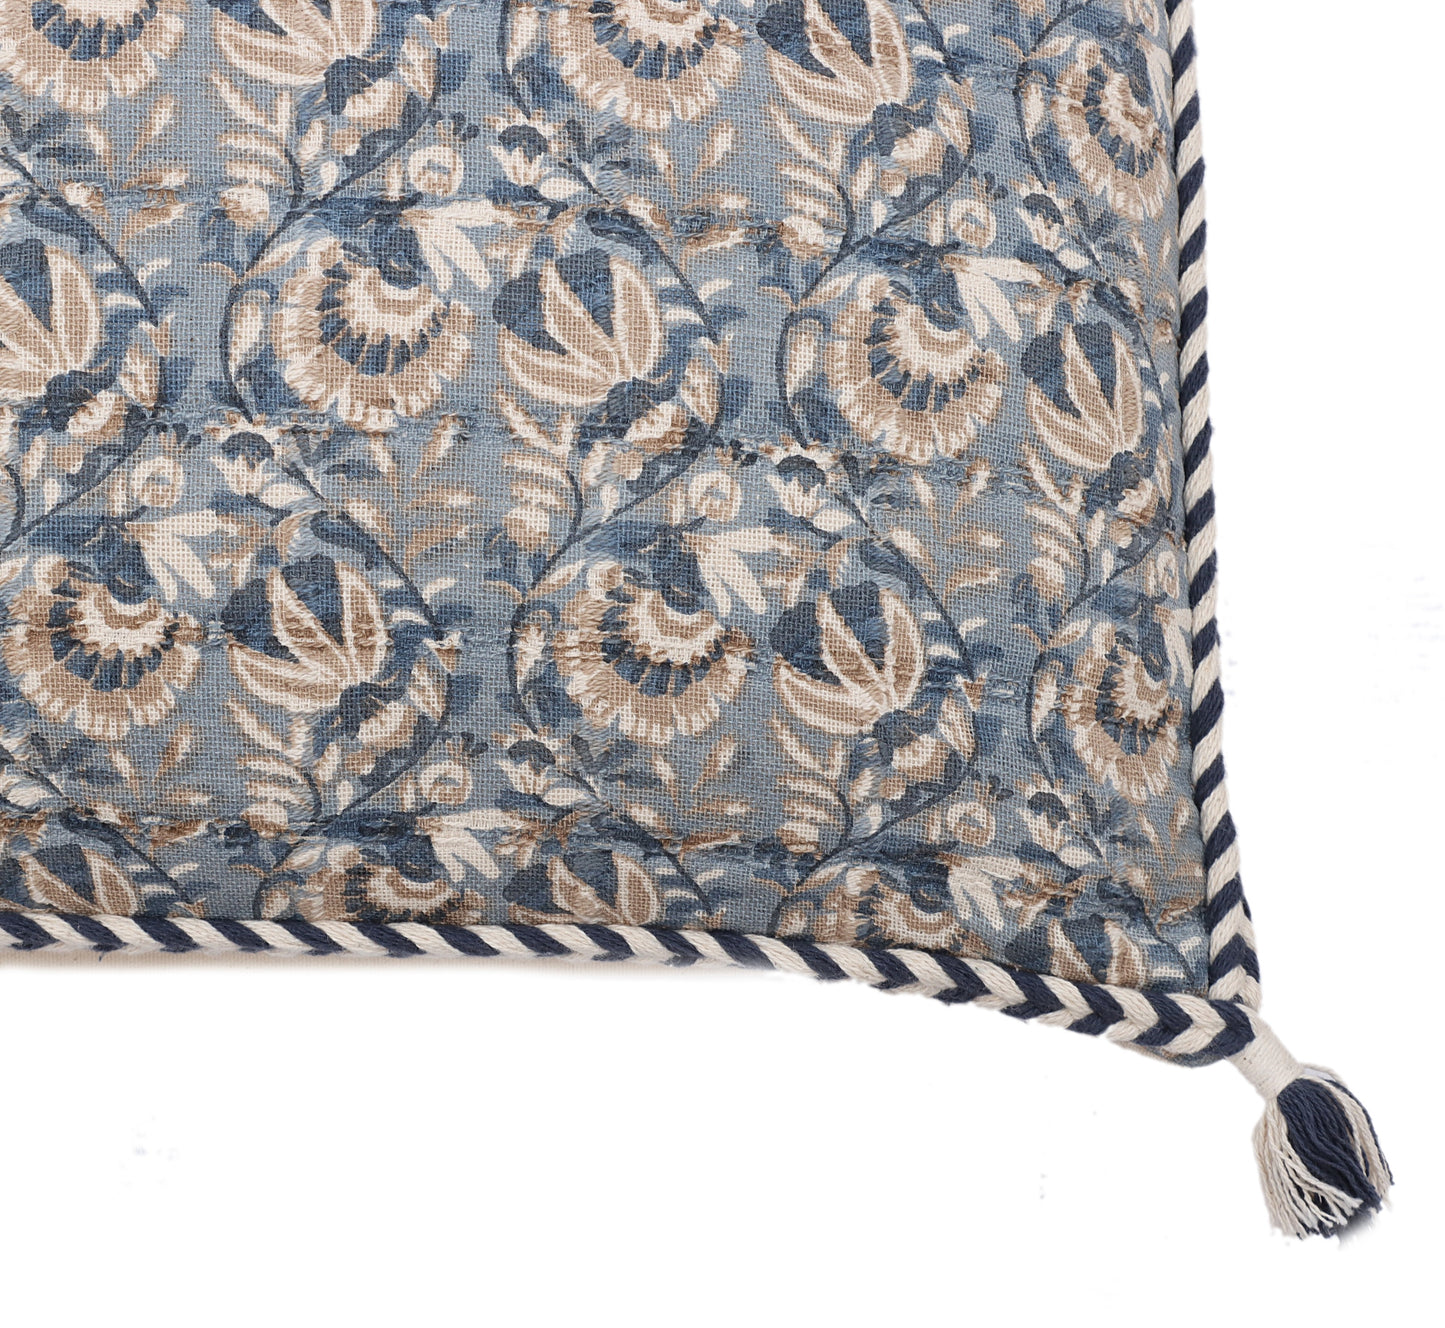 Blue and Beige Cotton Screen Printed Cushion Cover with Tassels